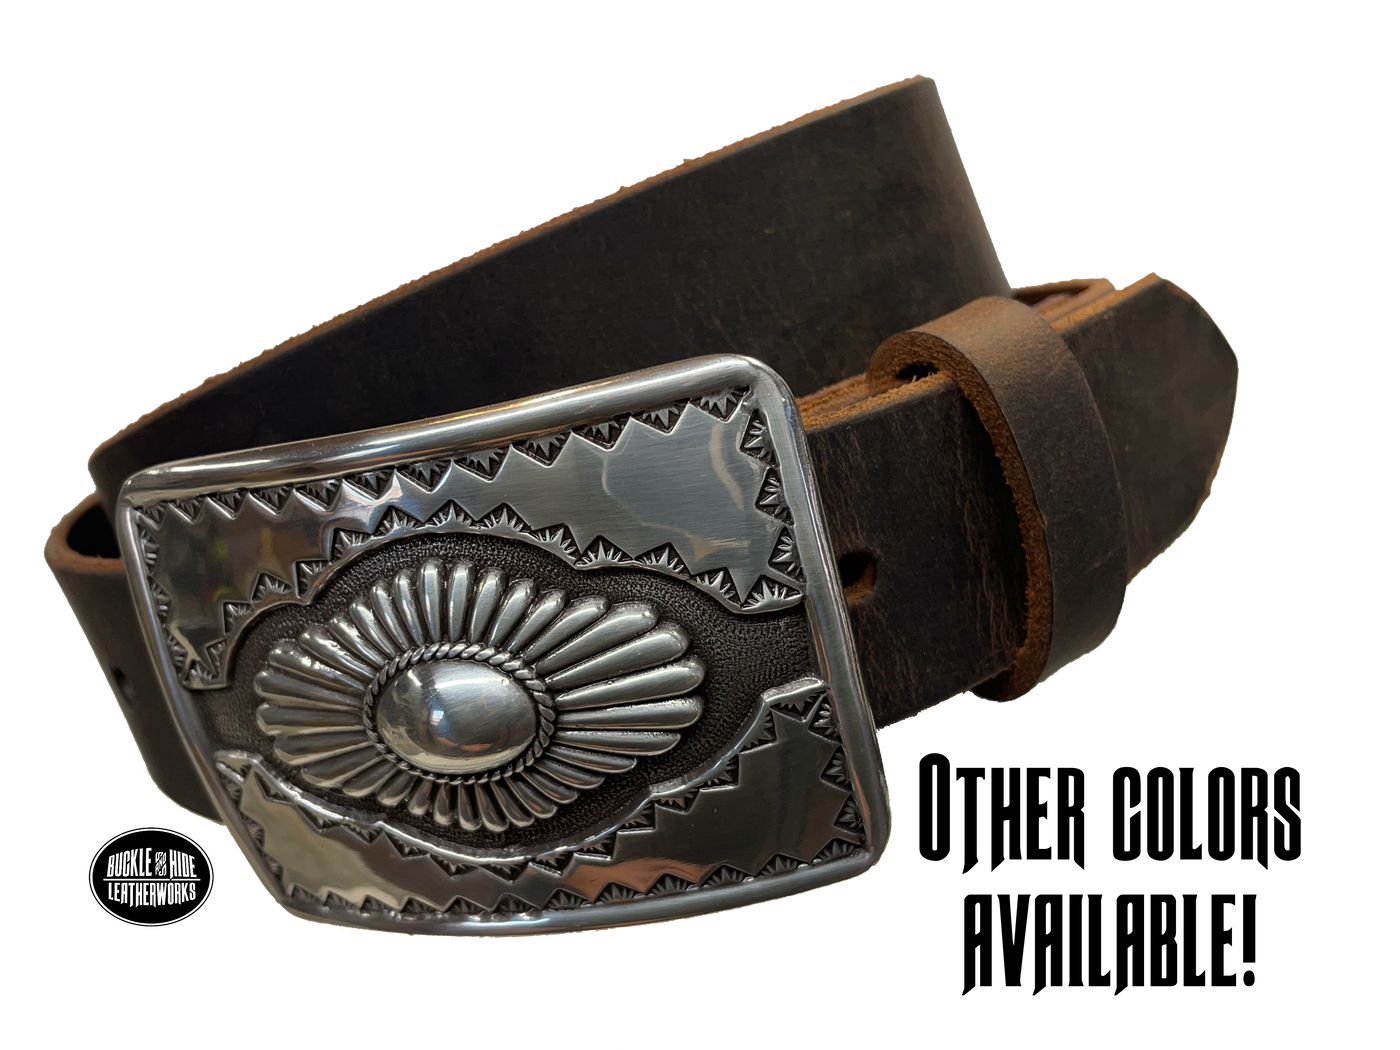 "The Cody" is a Western style belt buckle that will add a classic western look to your belt. ﻿CHOOSE ONE BELT STRIP COLOR! ﻿The belt is made from a single strip of leather in our shop in Smyrna, TN, just outside Nashville. The buckle is imported. ﻿Available in our retail and online shops. Main photo.